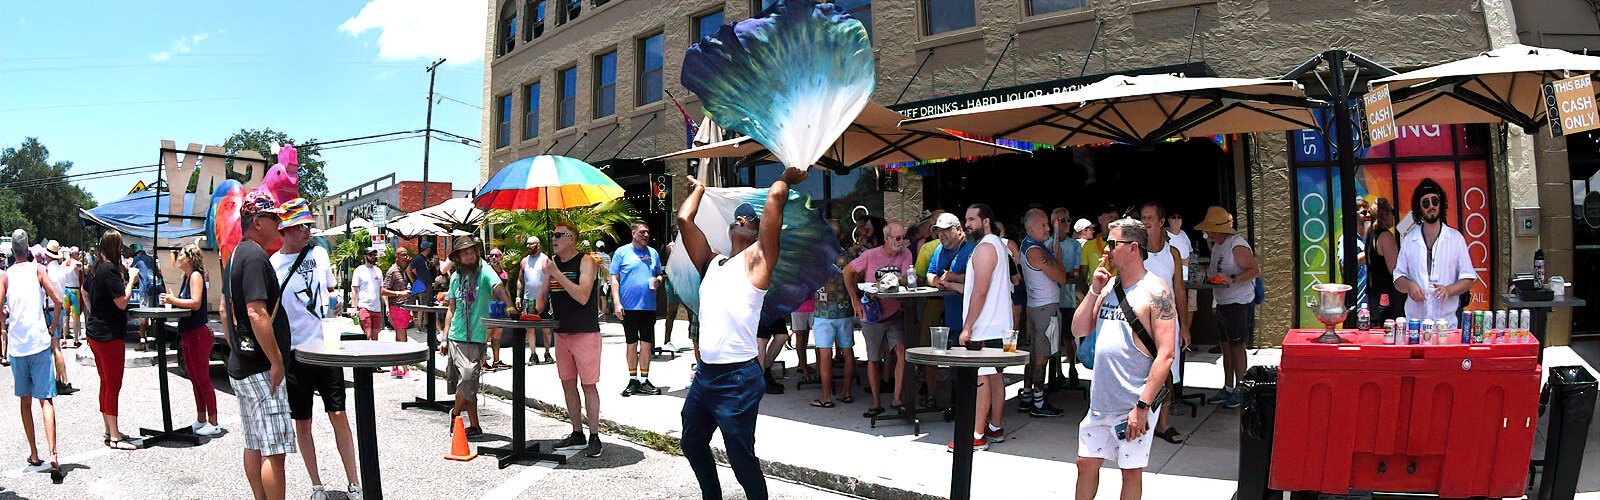  A roaming street performer entertains outdoor patrons at the Cocktail St Pete LGBTQ bar on Central Avenue.